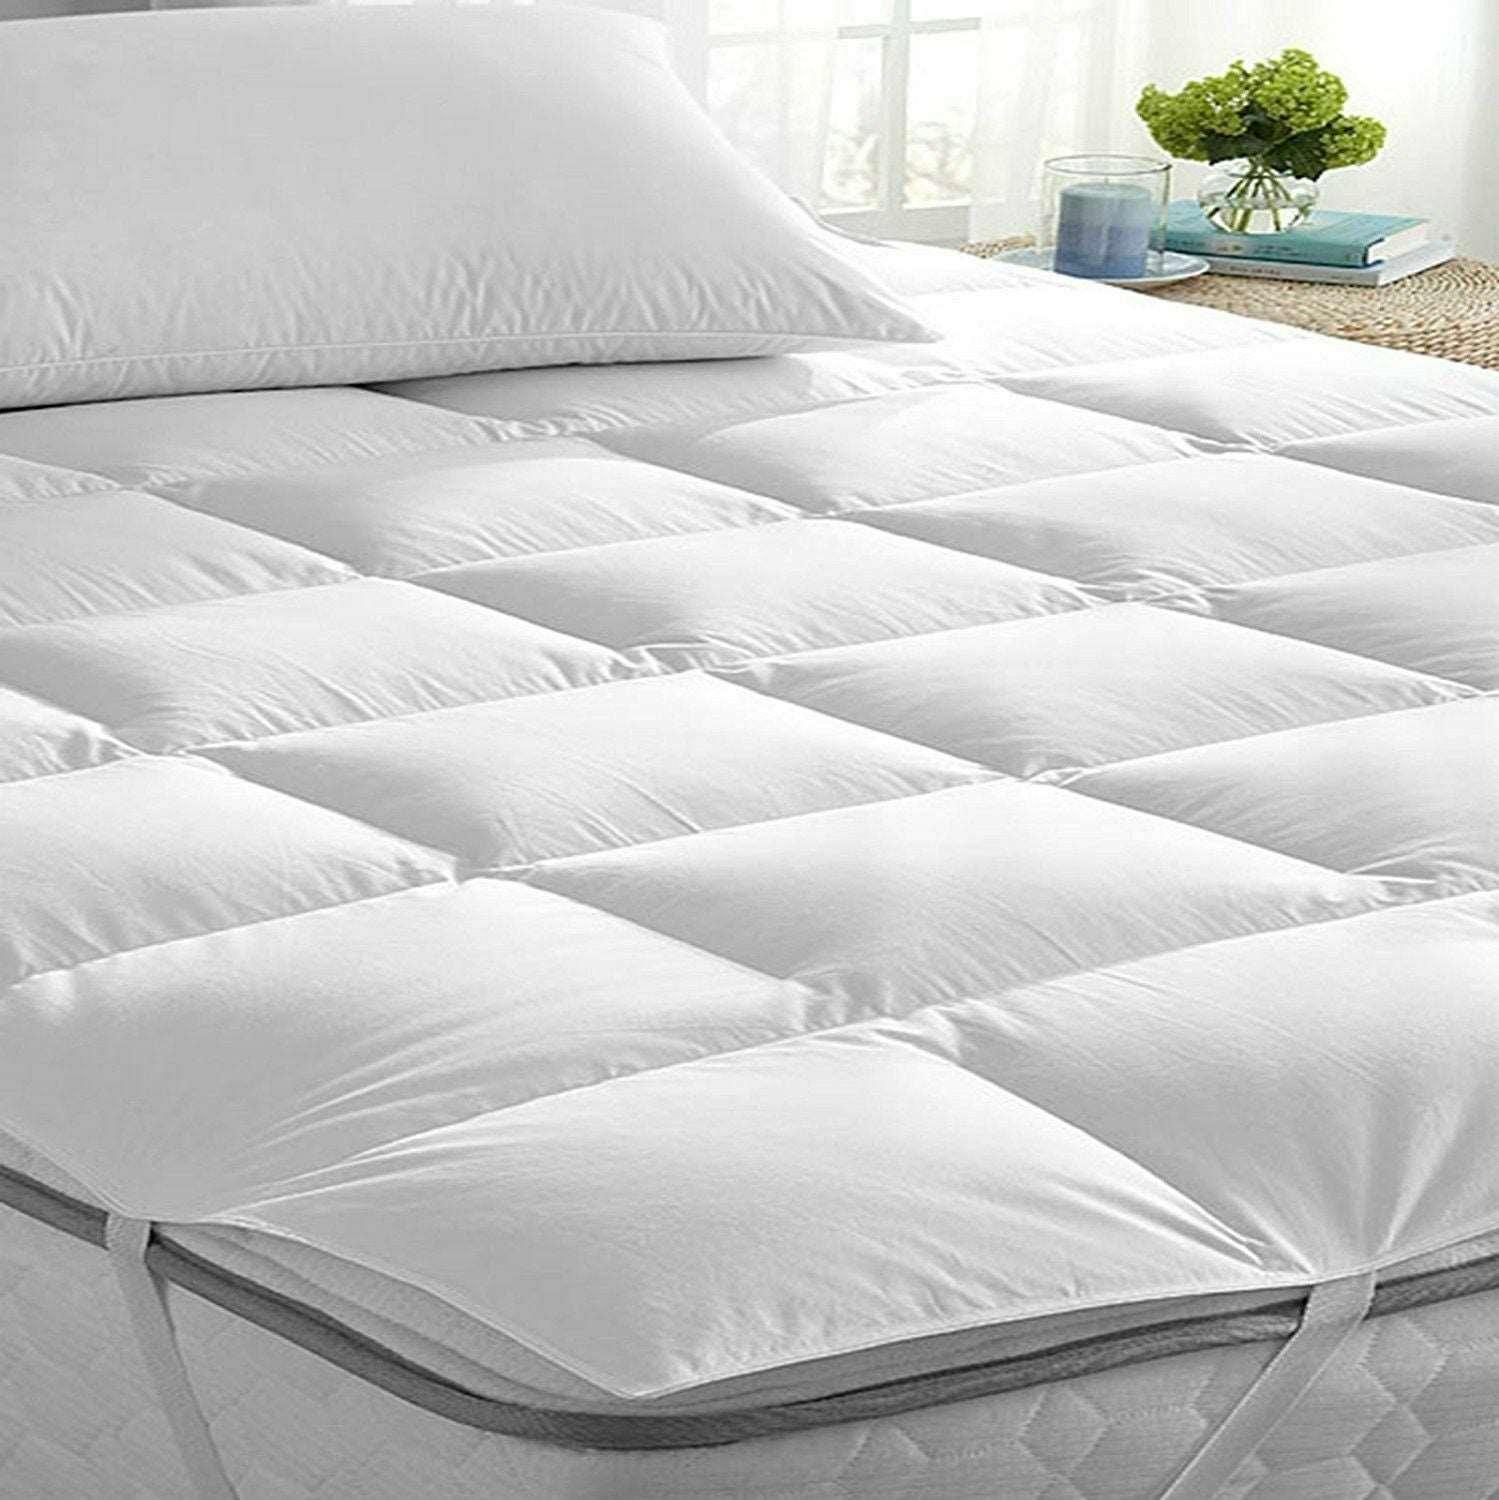 Luxury Duck Feather & Down Mattress Topper Mattress Cover Available In All Sizes - Arlinens